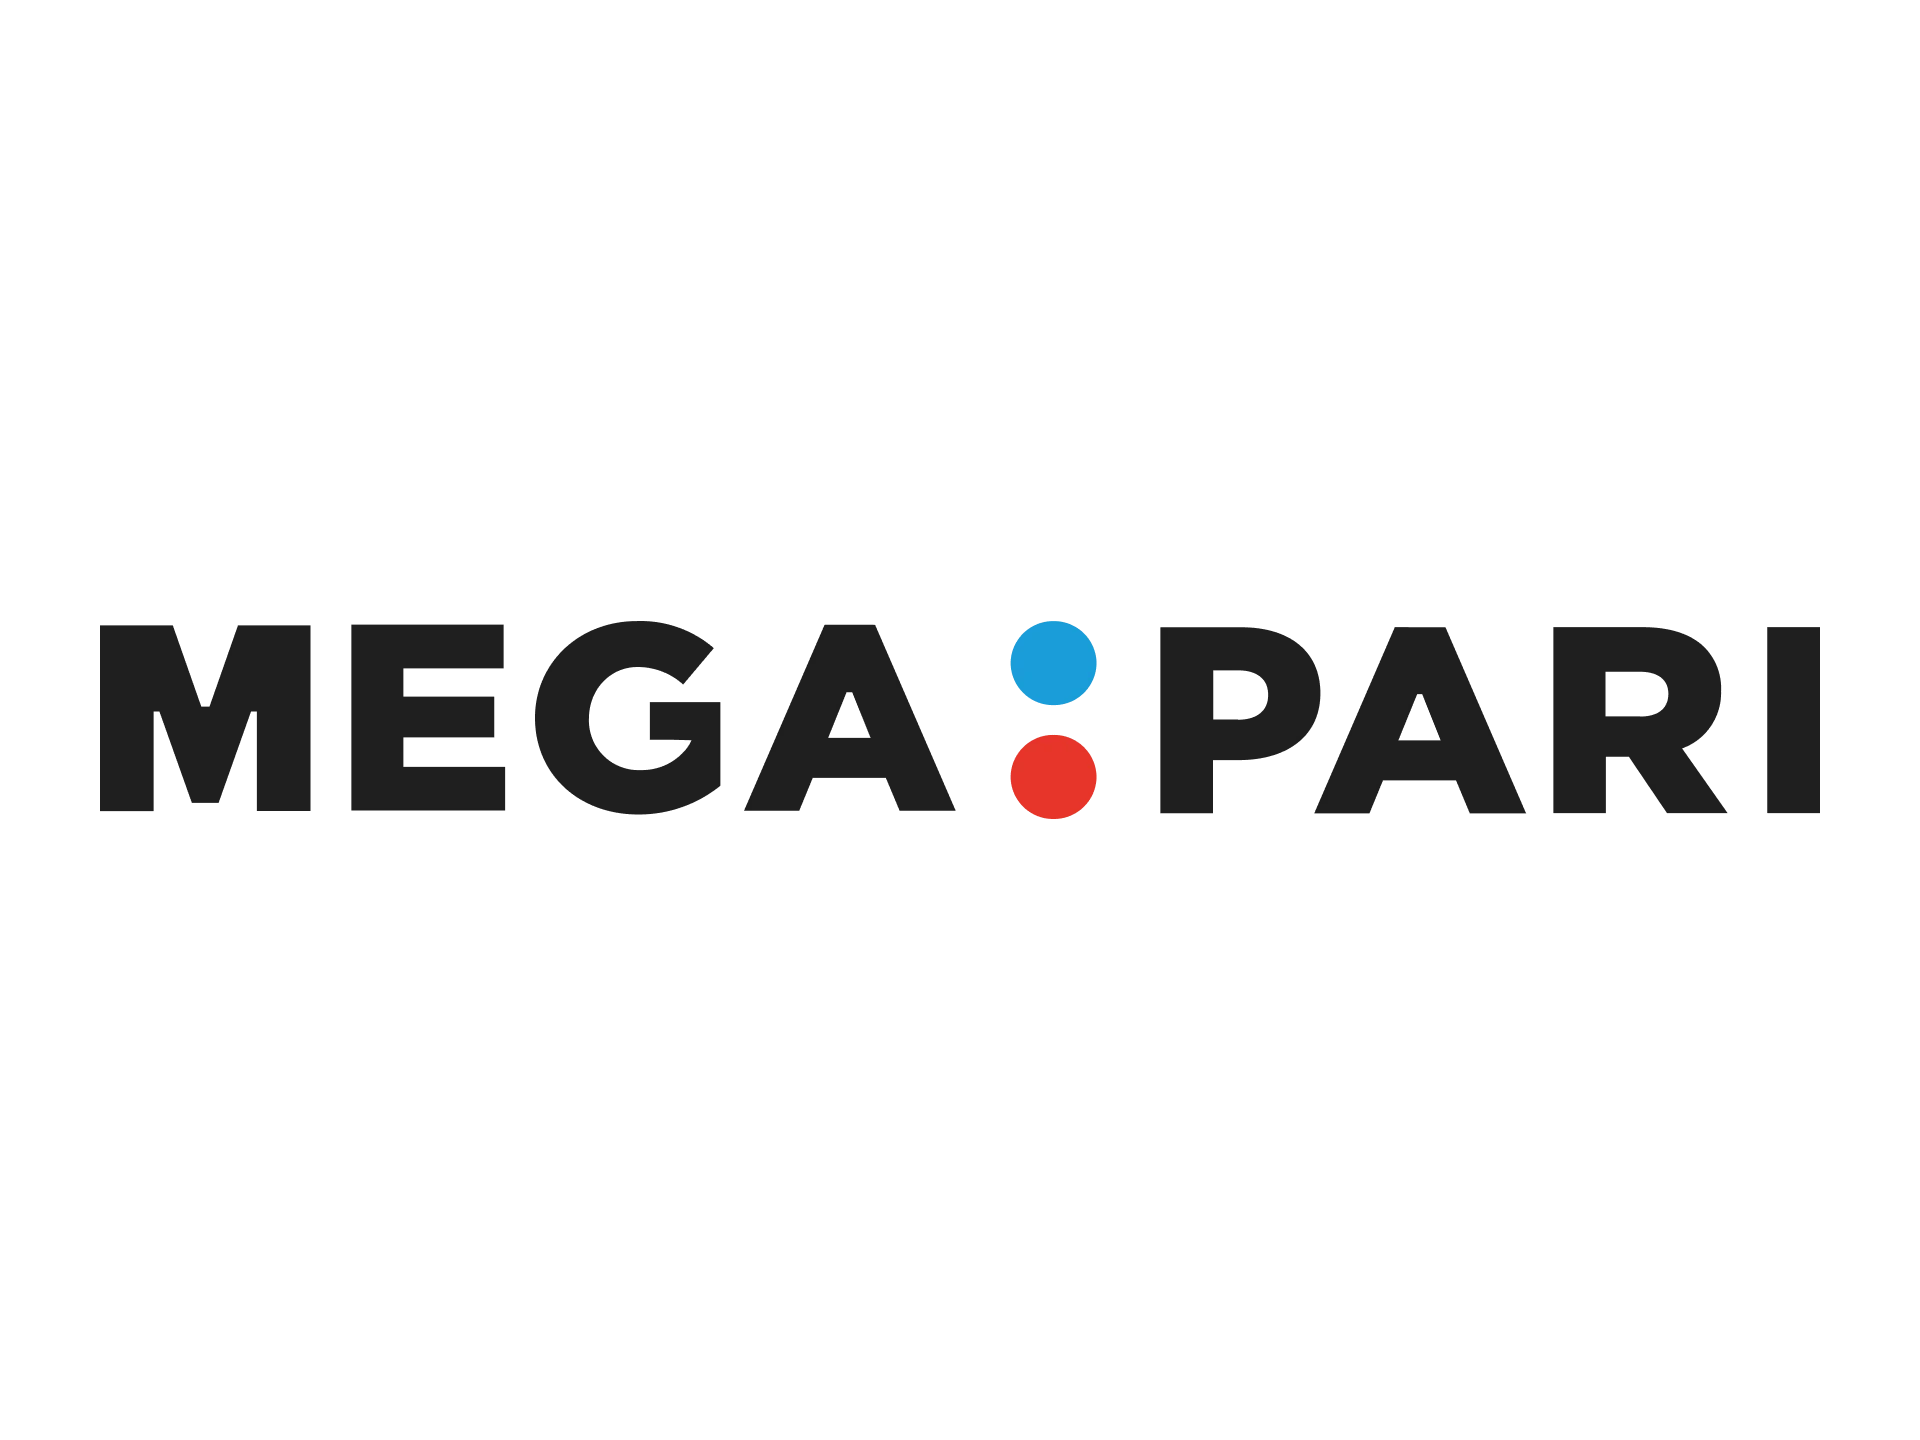 Megapari is a new bookmaker for cricket betting.